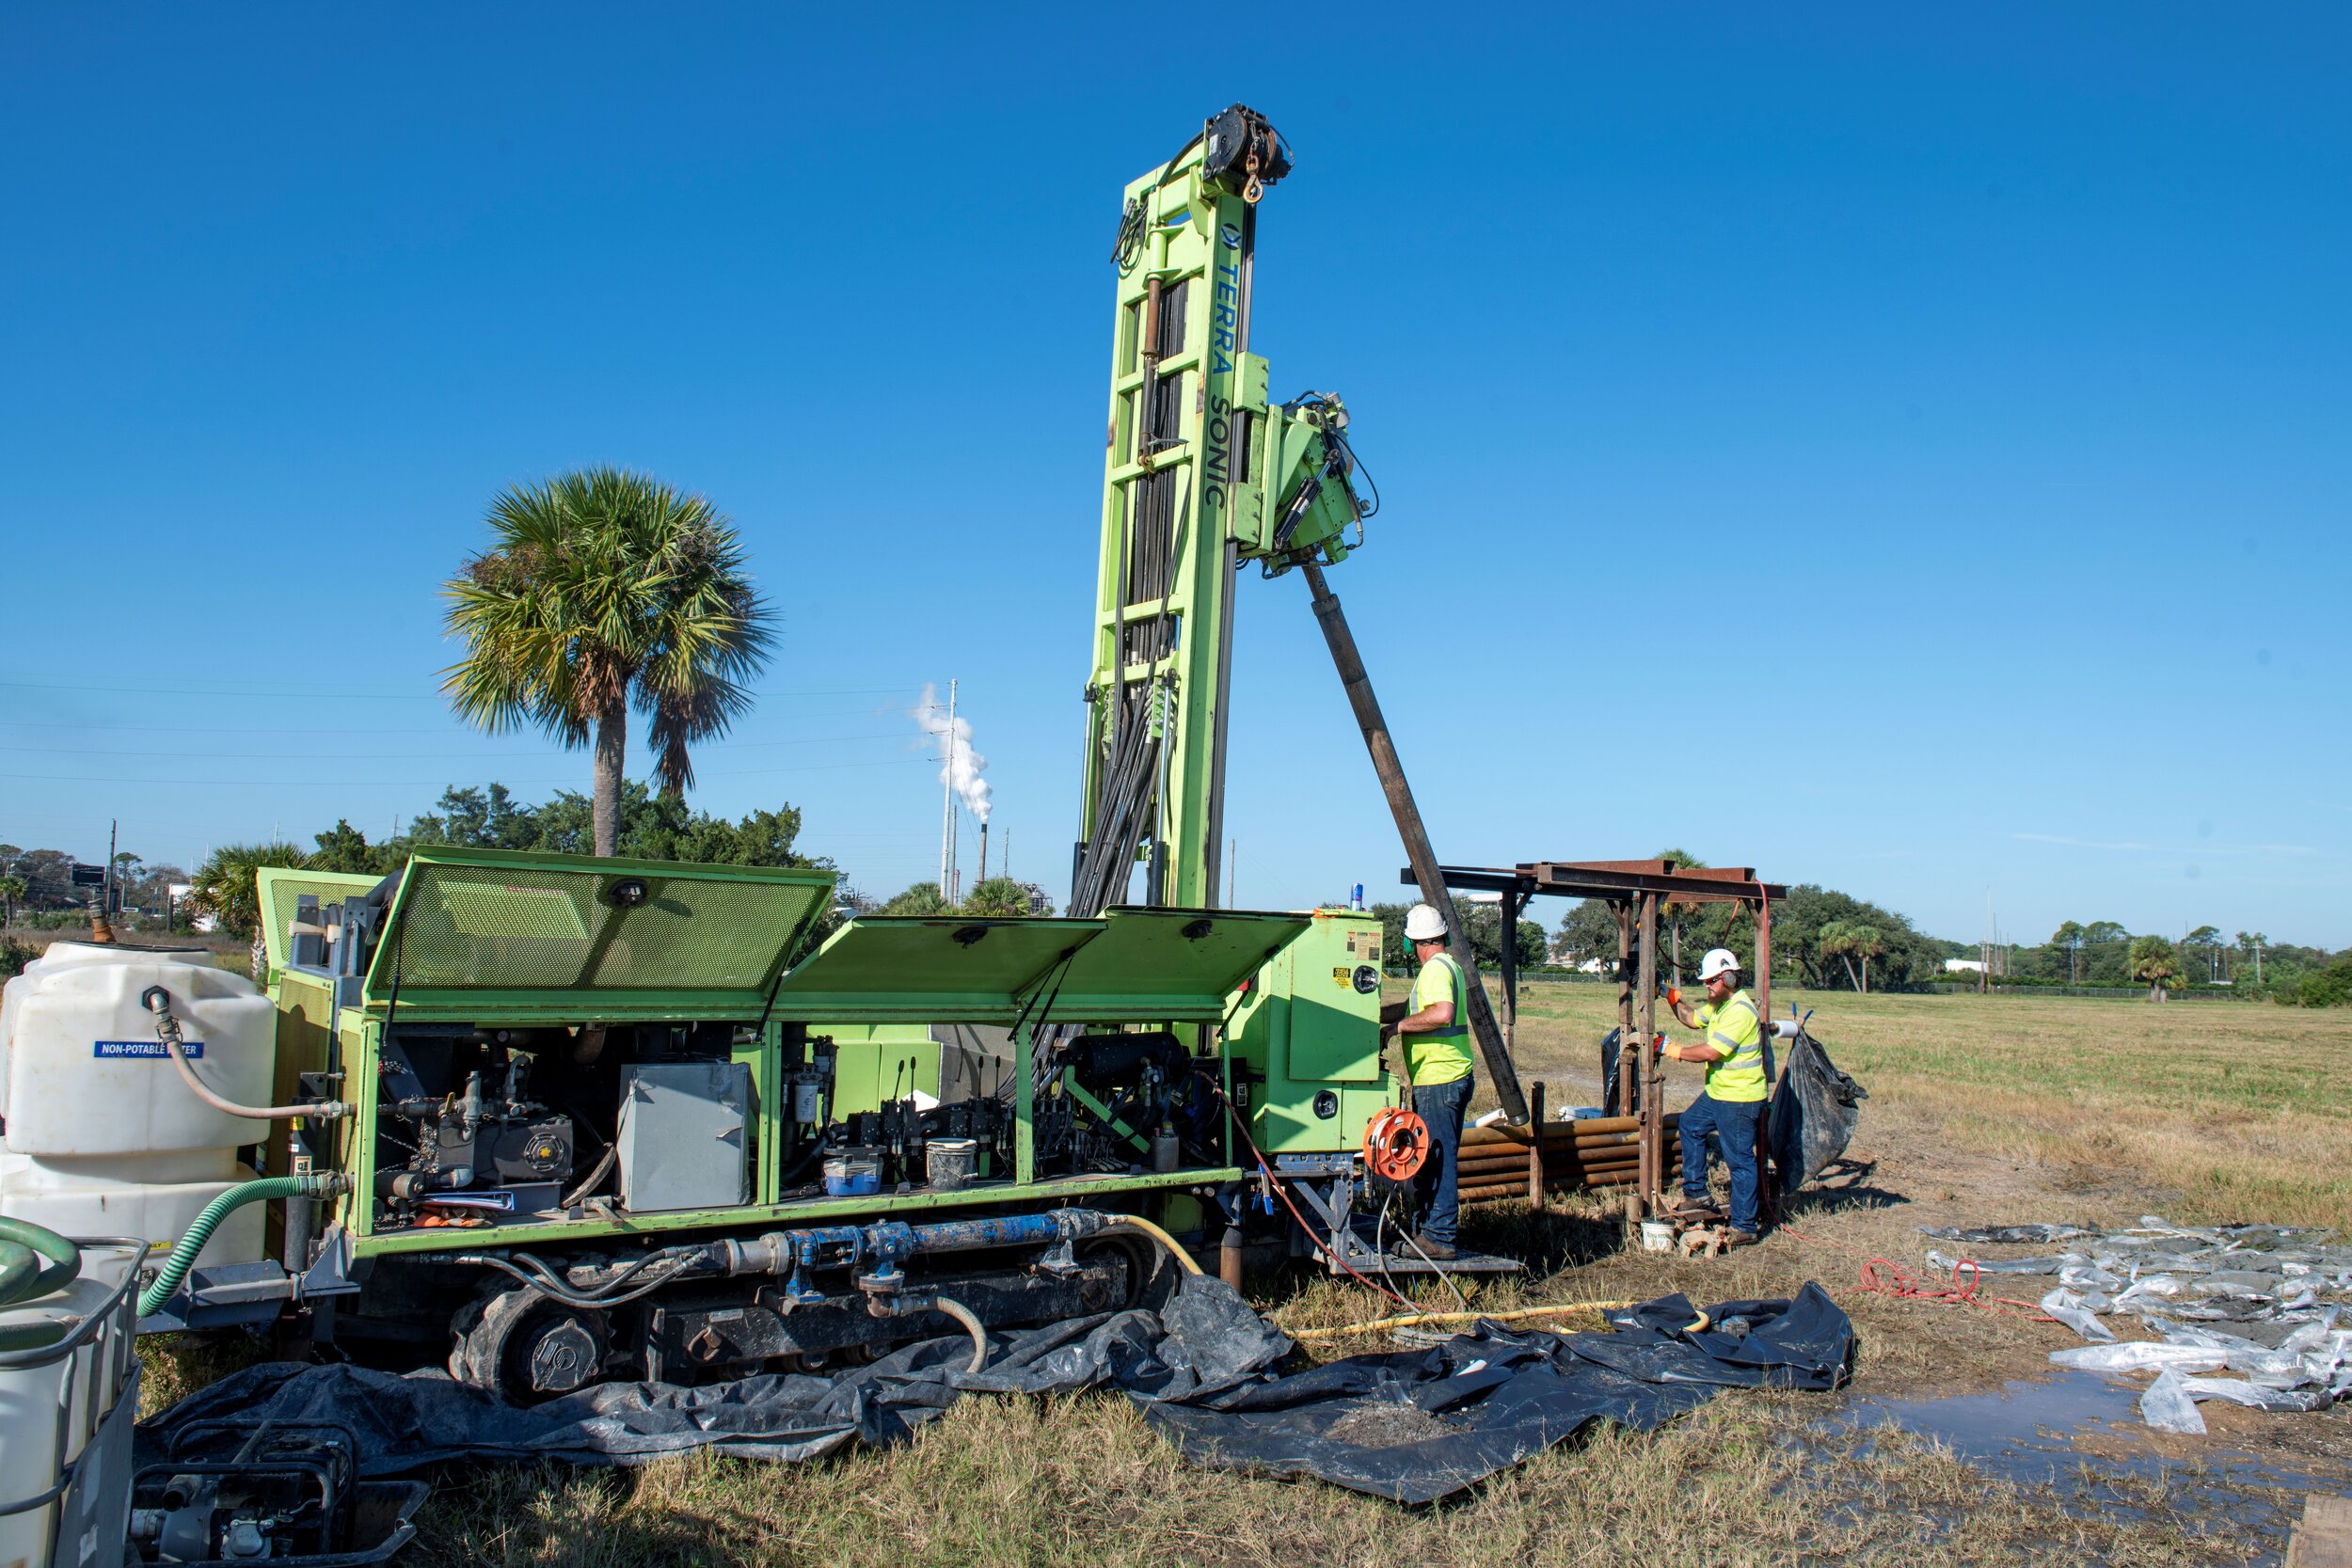   Drill rig for installing groundwater monitoring wells  